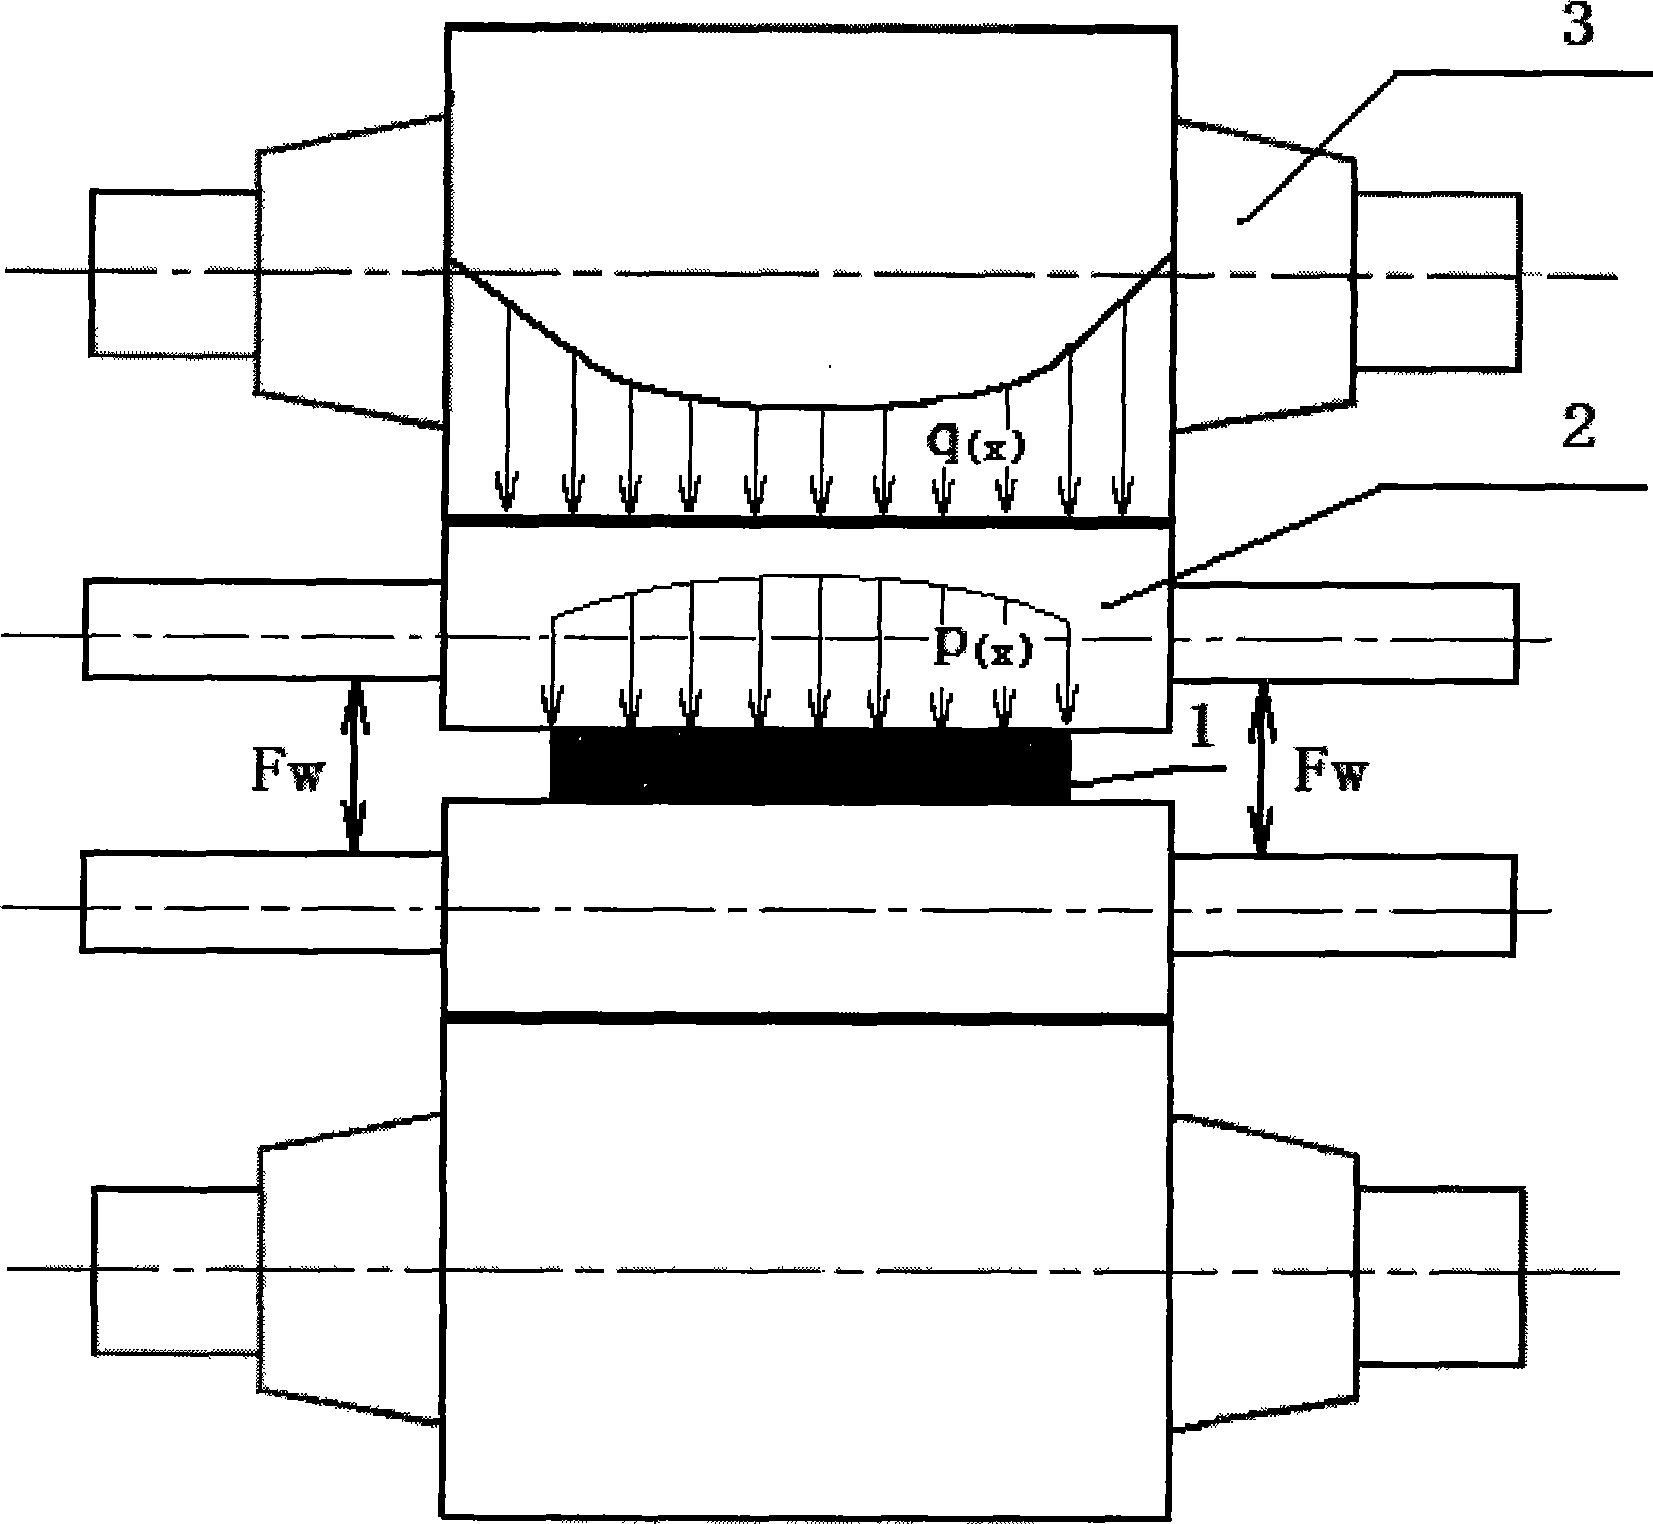 Computing method for roll profile of steckel mill